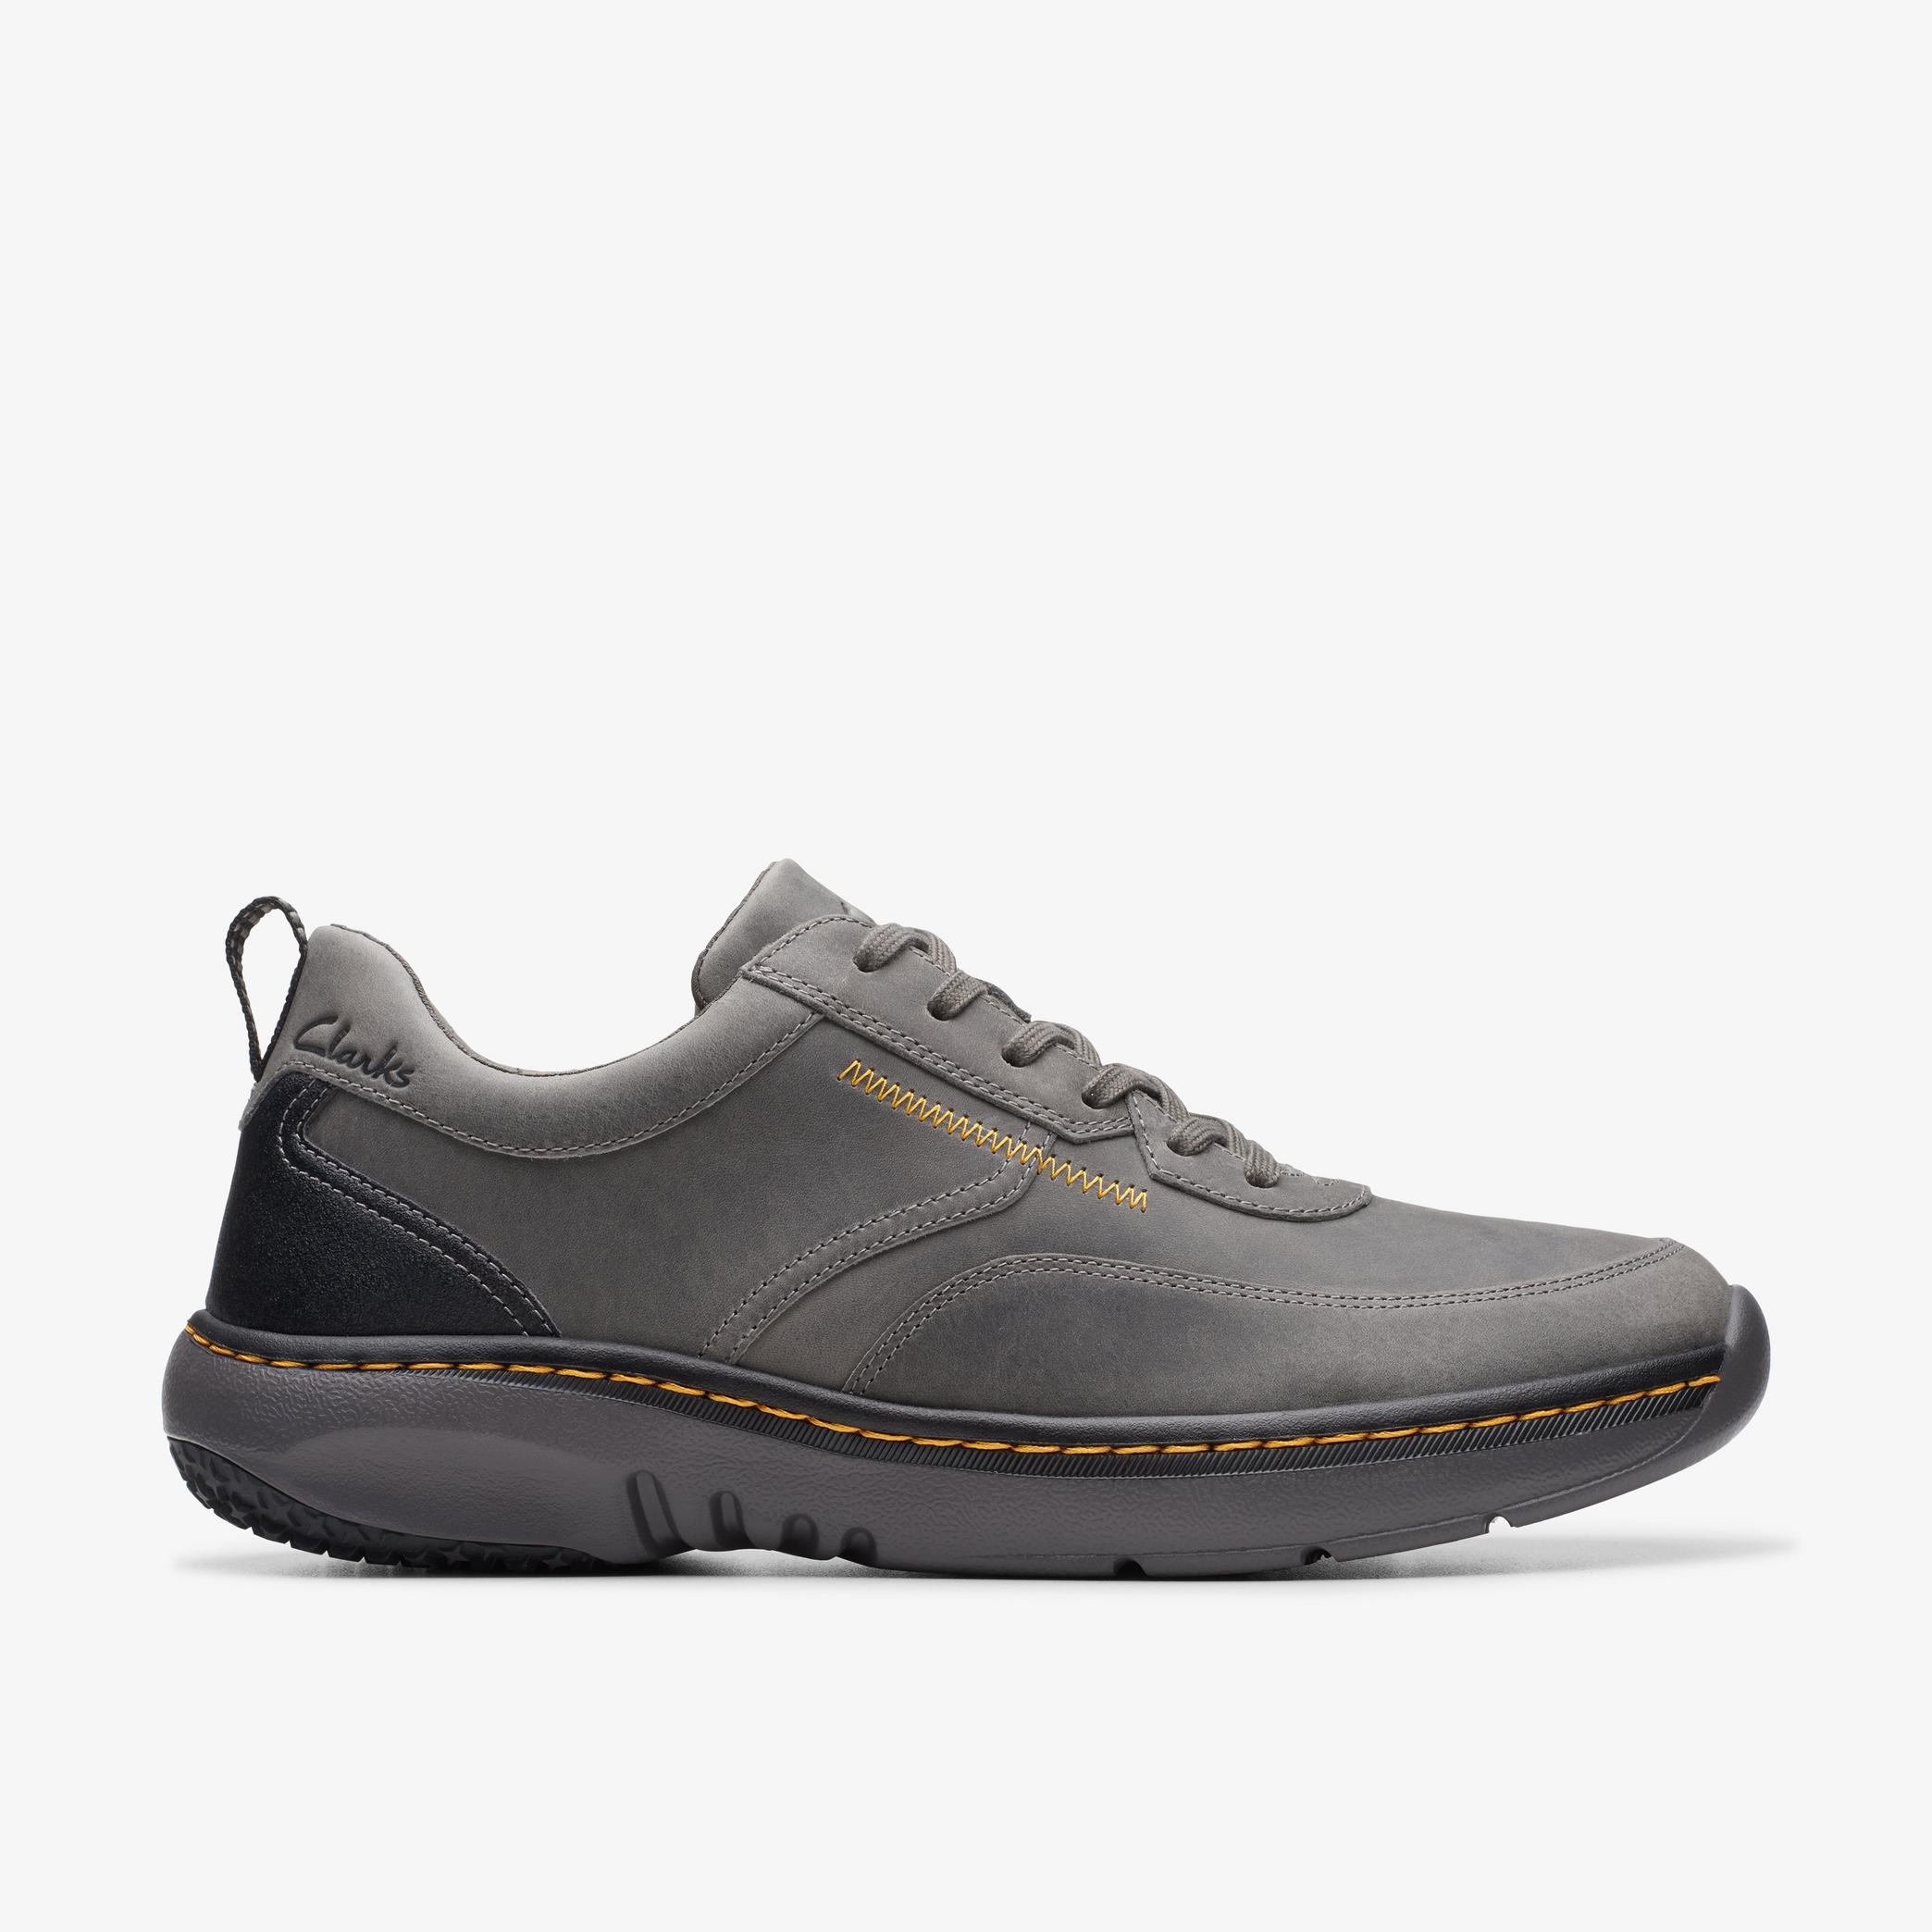 Men ClarksPro Lace Dark Grey Leather Shoes | Clarks US